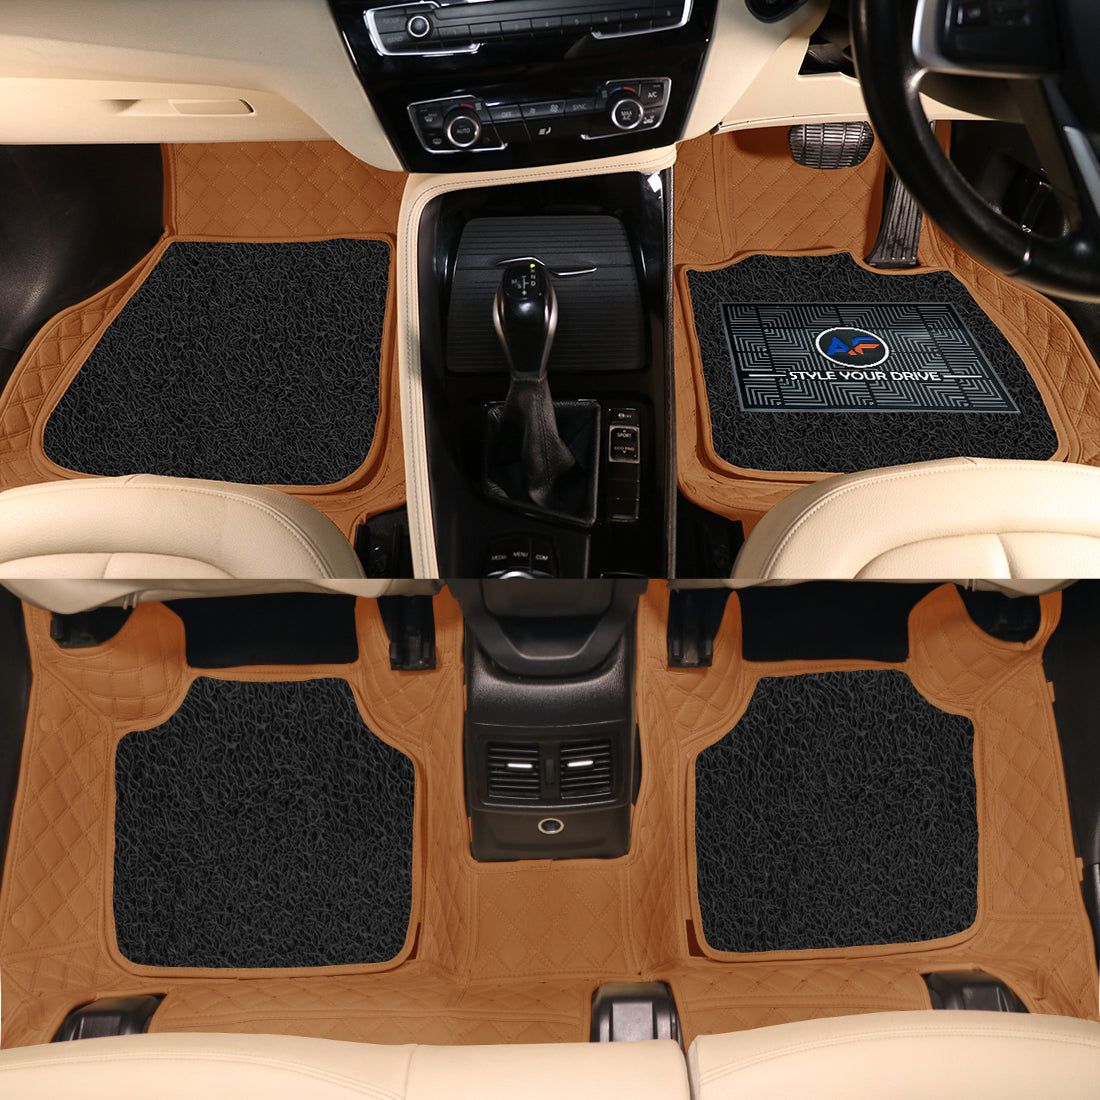 Porsche Panamera 4 2011 7D Luxury Car Mat, All Weather Proof, Anti-Skid, 100% Waterproof & Odorless with Unique Diamond Fish Design (24mm Luxury PU Leather, 2 Rows)